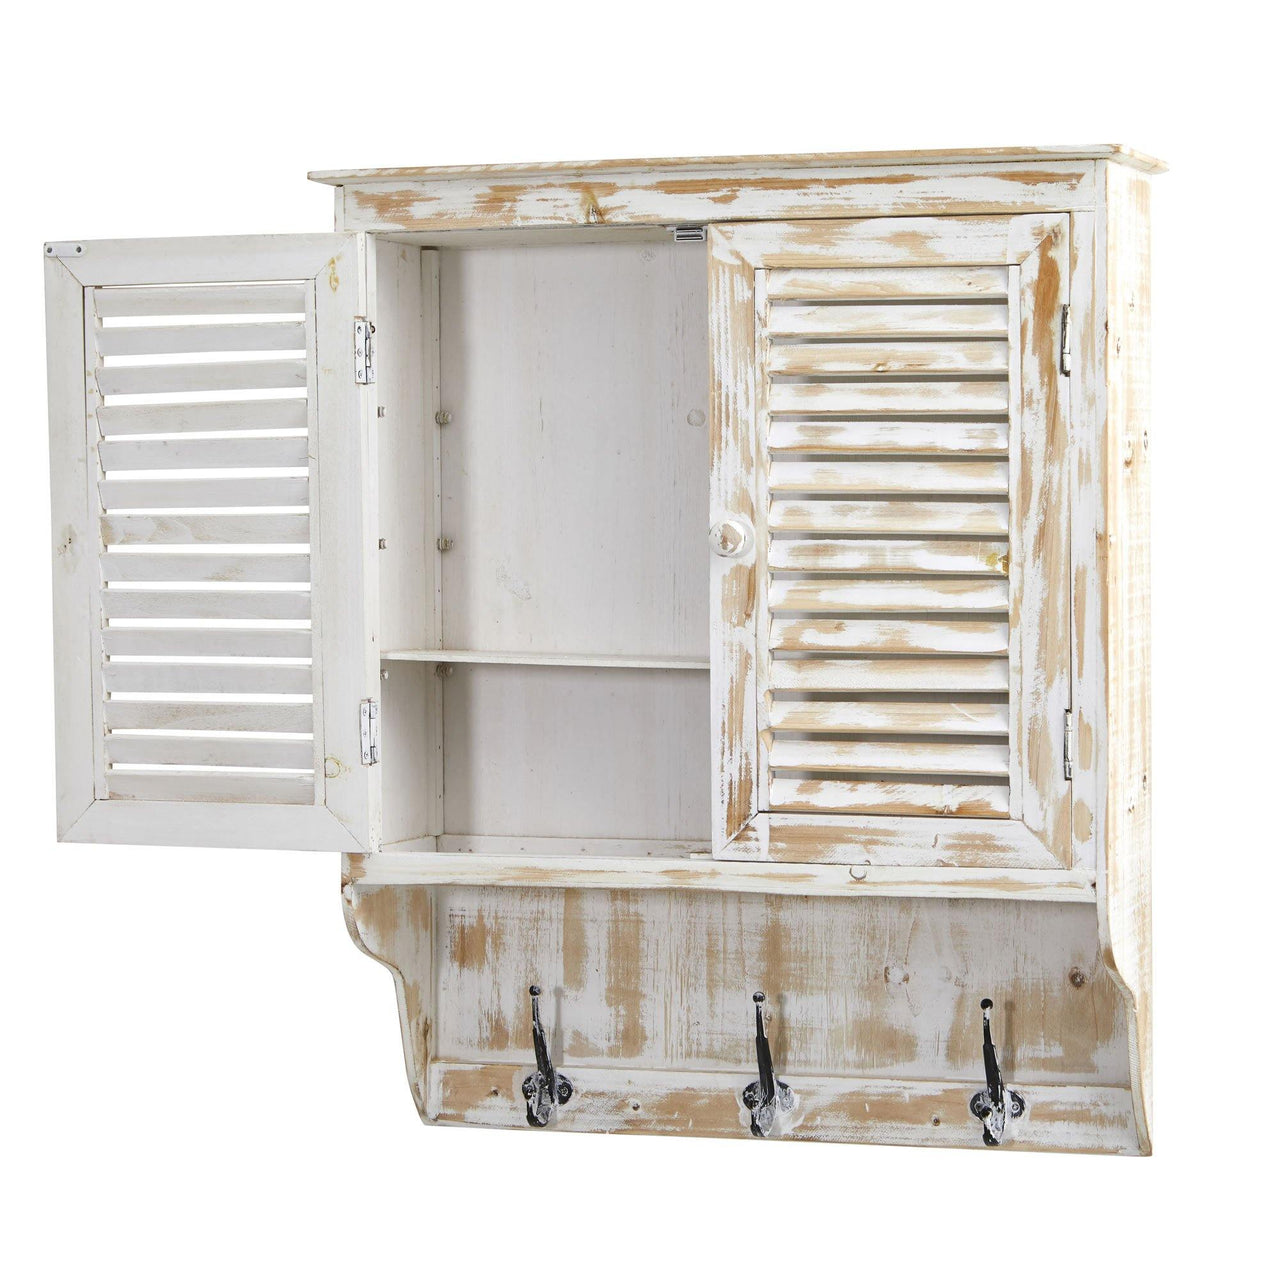 32” White Washed Wall Cabinet With Hooks - The Fox Decor